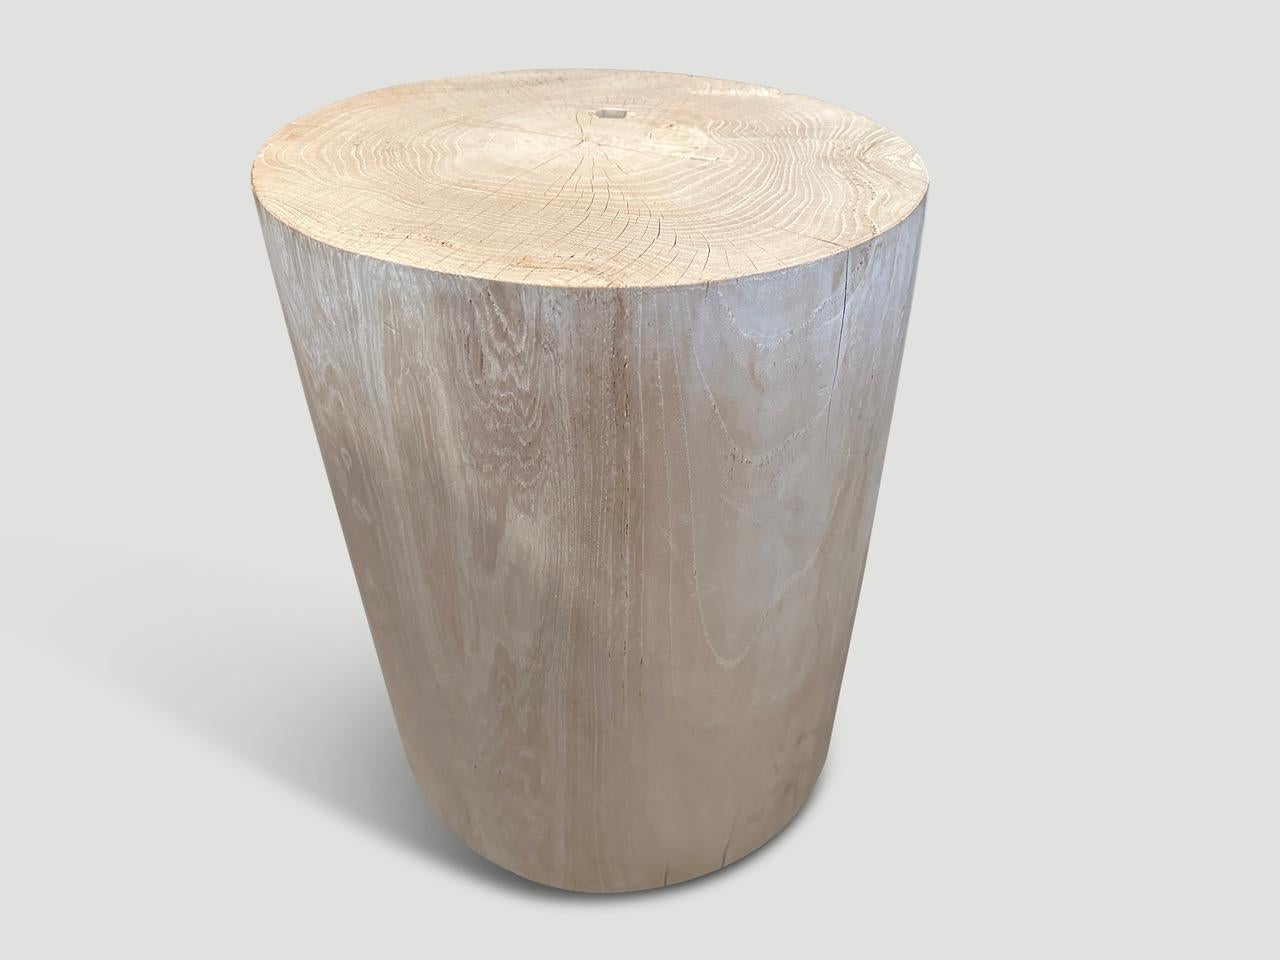 Beautiful reclaimed teak wood cylinder side table or stool. Bleached to a bone finish and carved into a minimalist cylinder whilst respecting the natural organic wood. Also available charred. We have a collection. The images reflect one.

The St.